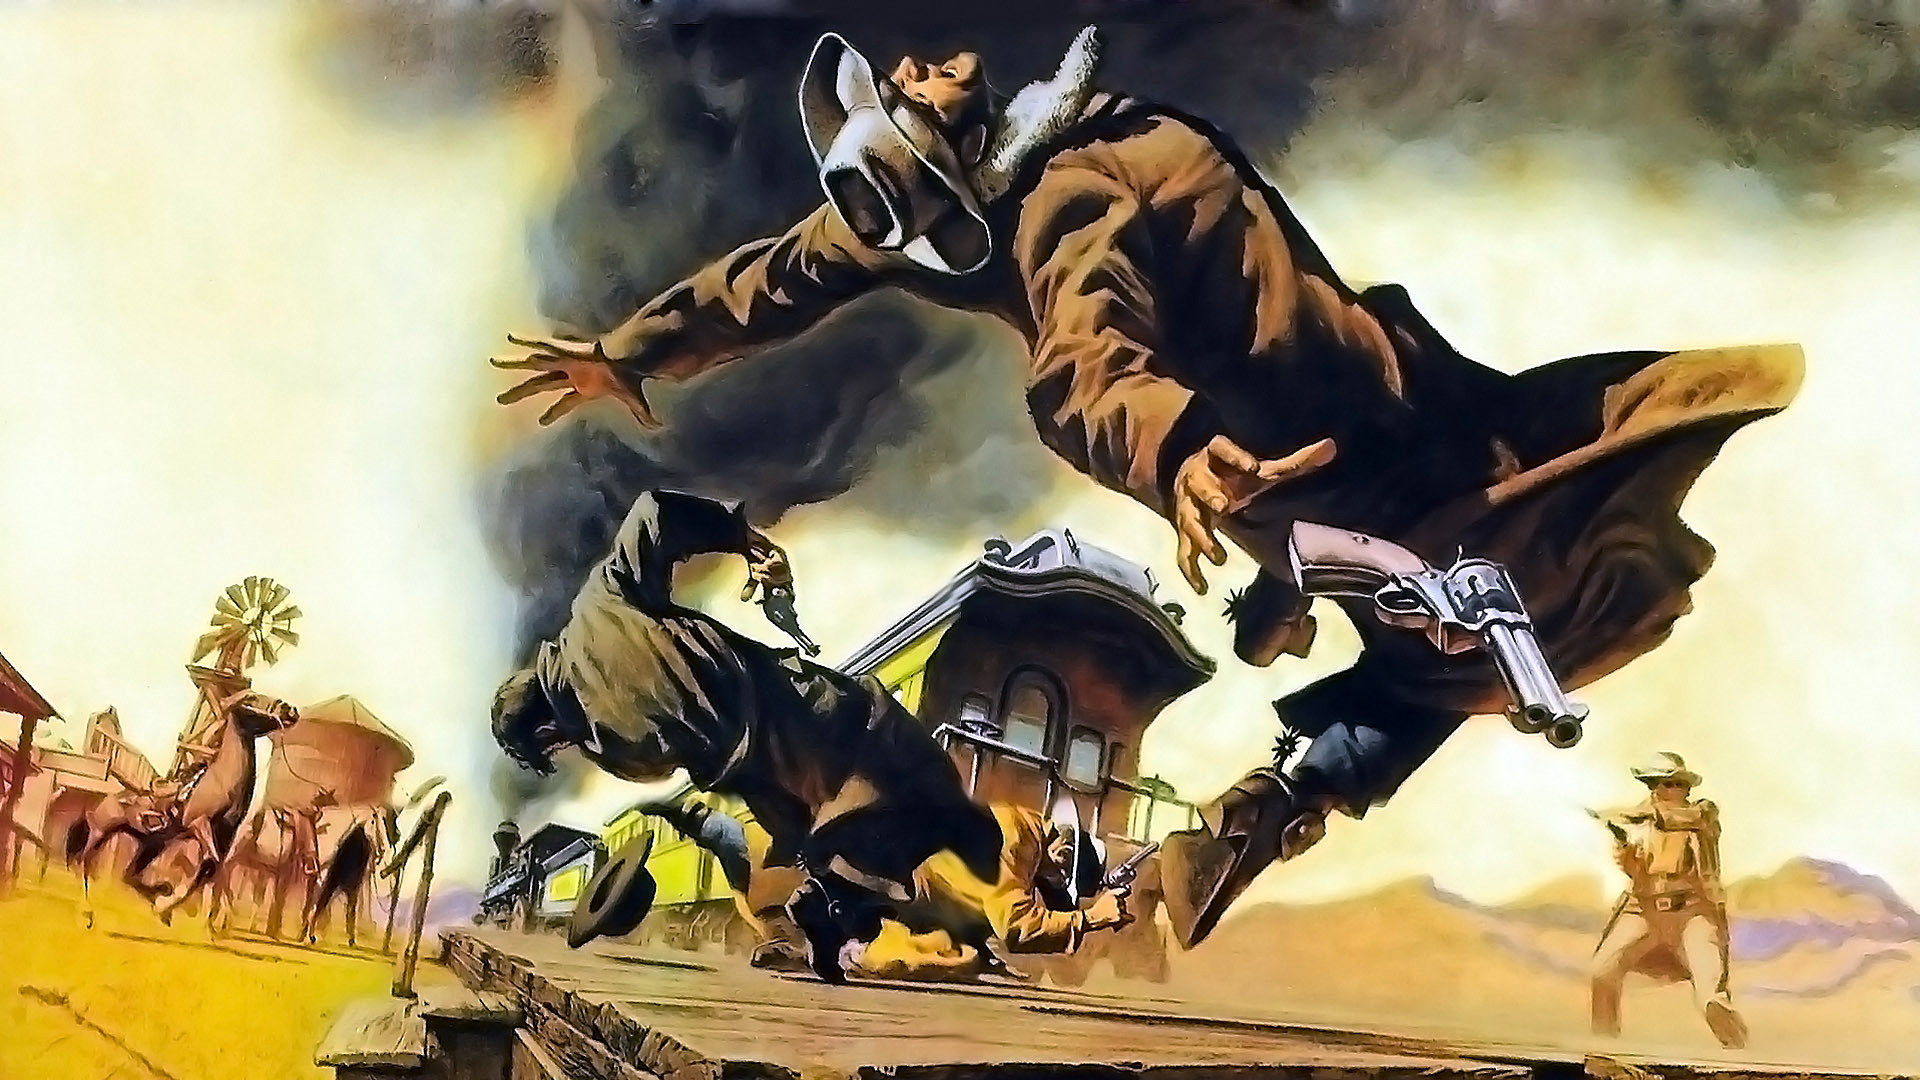 1920x1080 Cowboy Drawing Once Upon a Time in the West wallpaper background